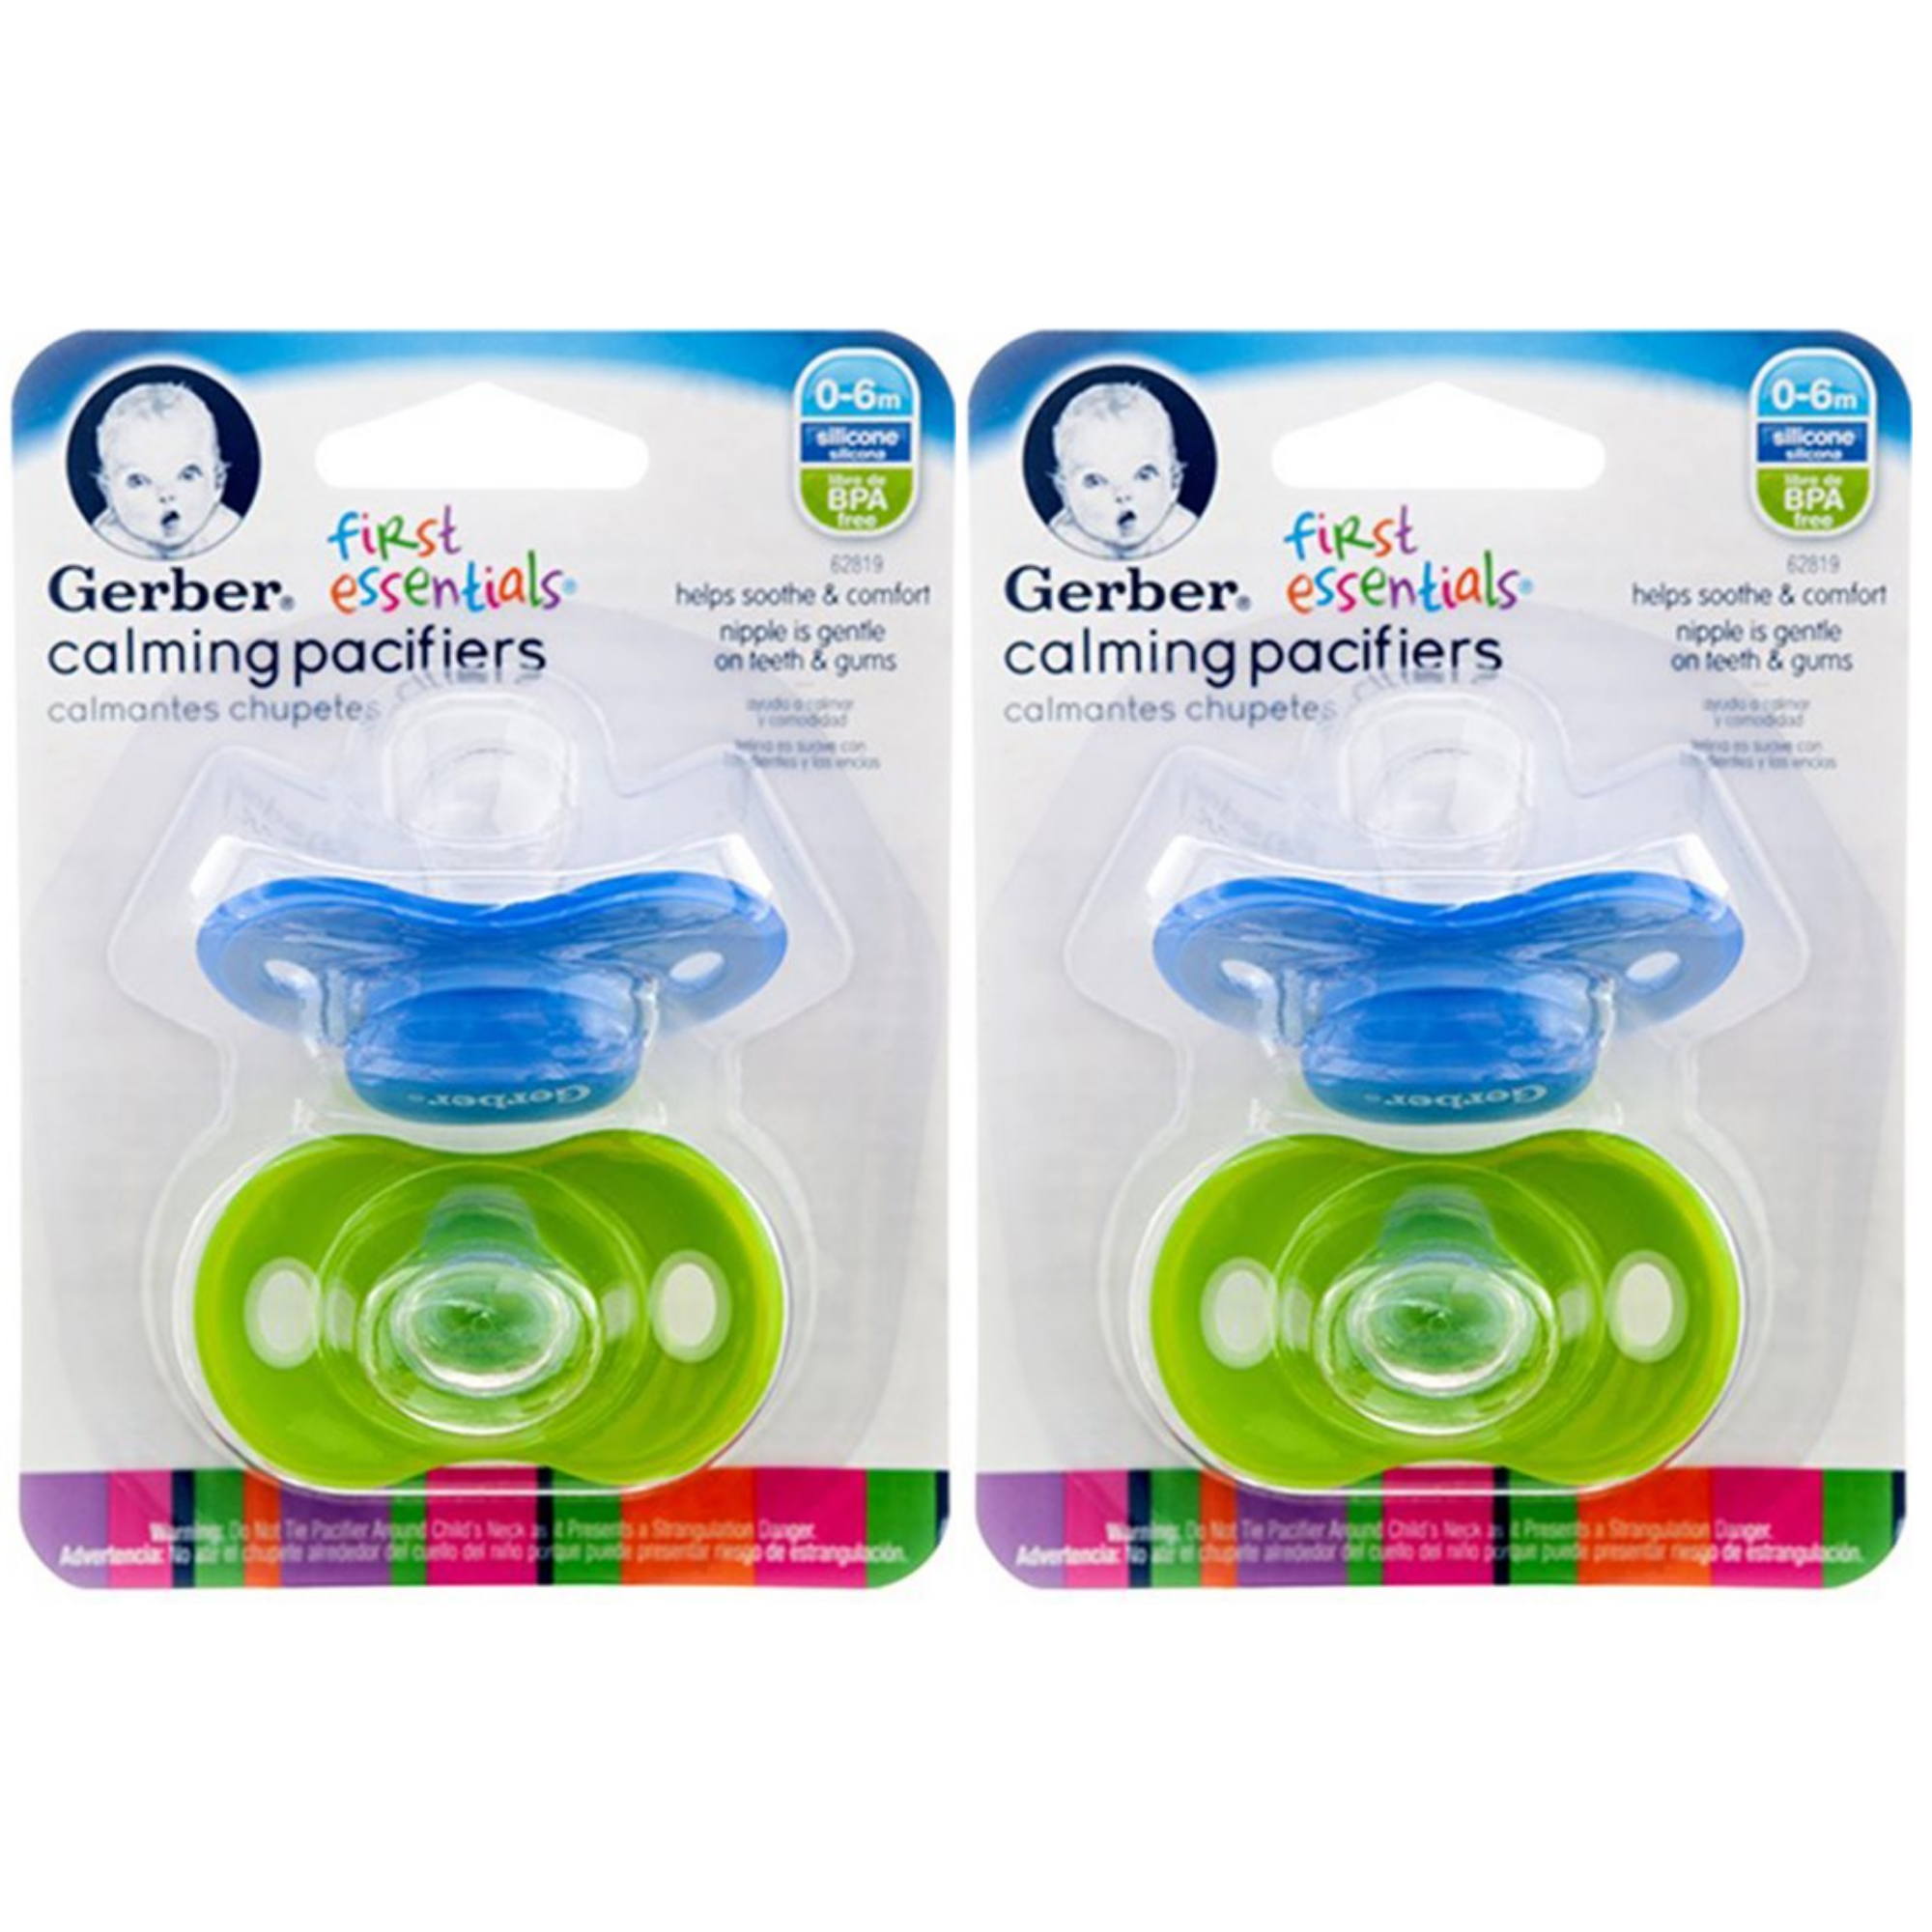 0-6 Months GERBER First Essentials Calming Pacifier in Assorted Colors